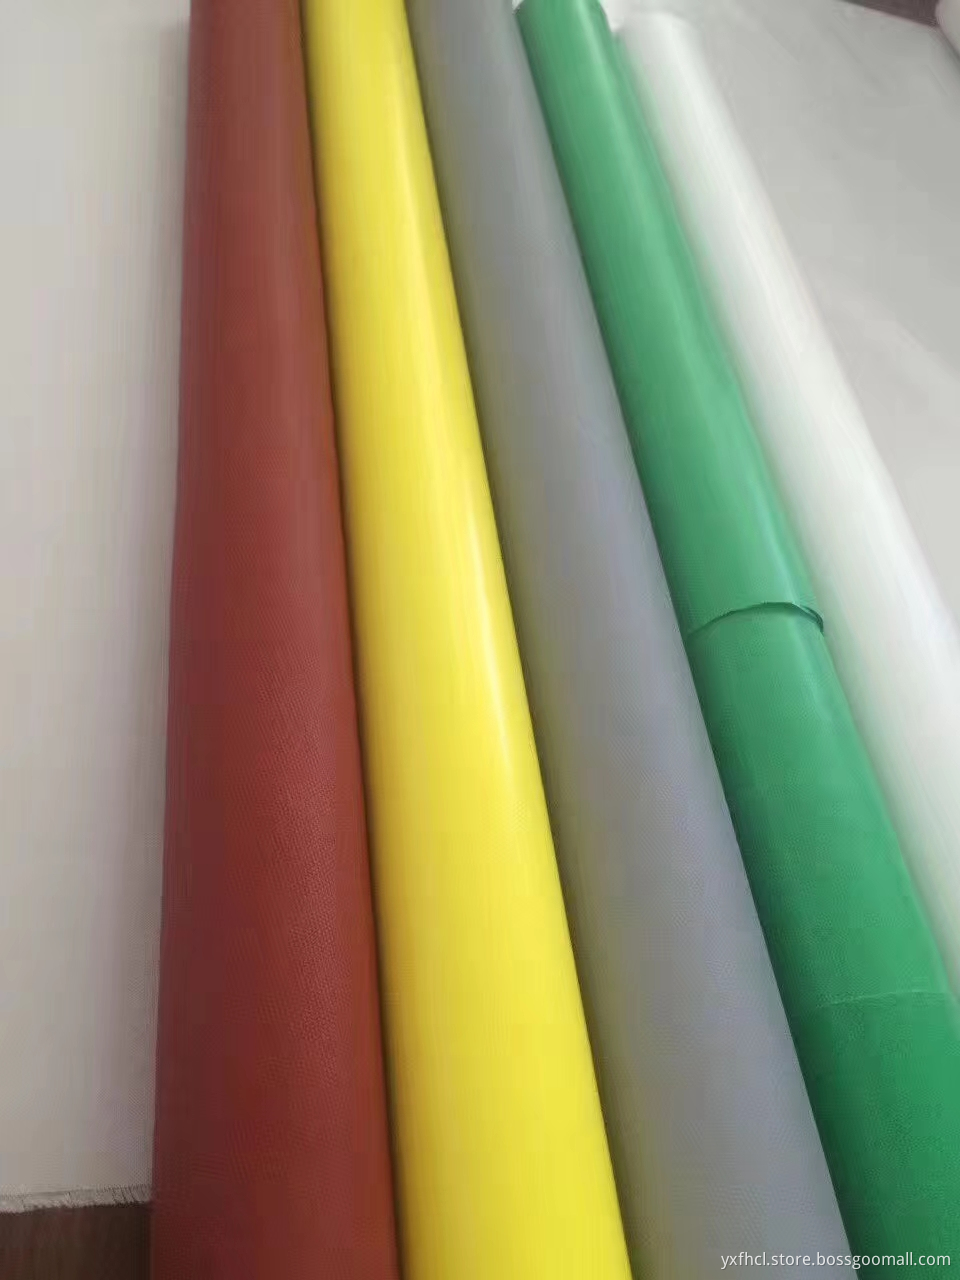 Greater abrasion resistance silicone cloth